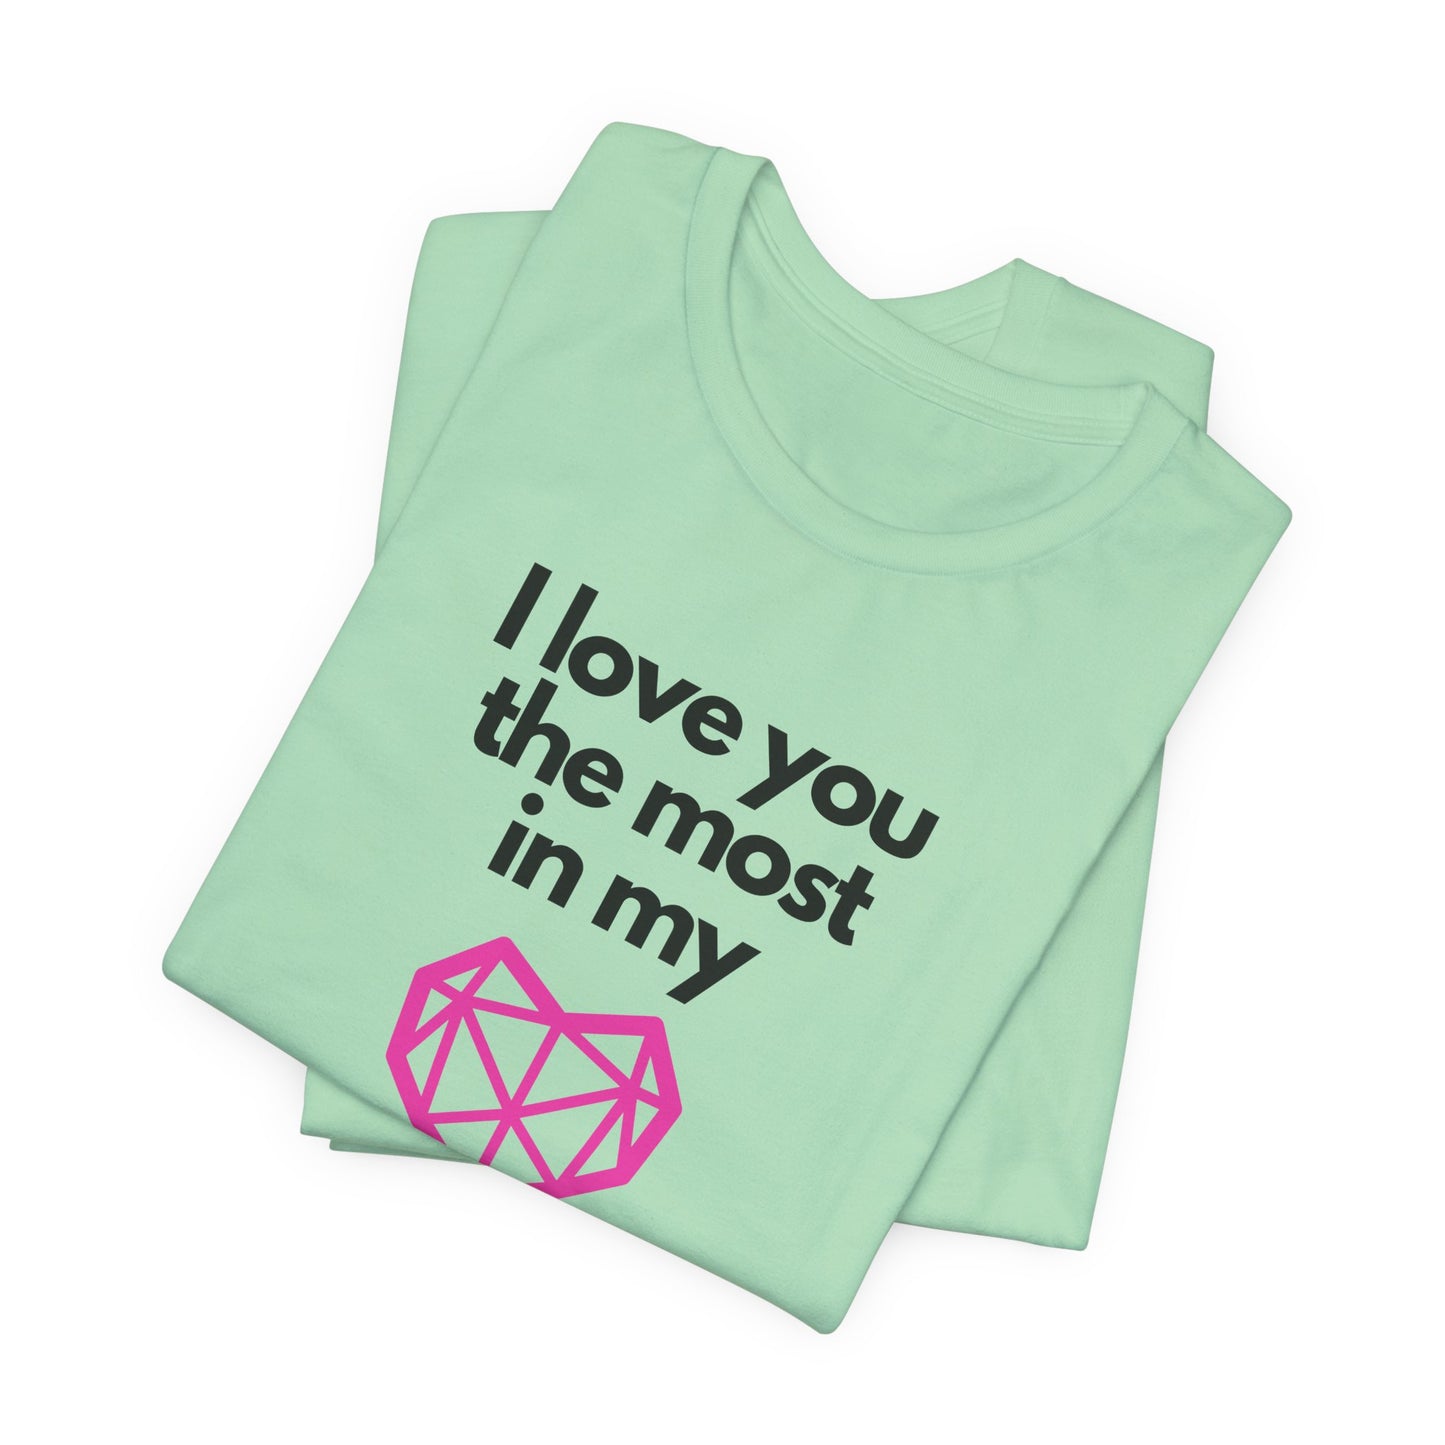 I love you the most on my heart word and graphic t-shirt